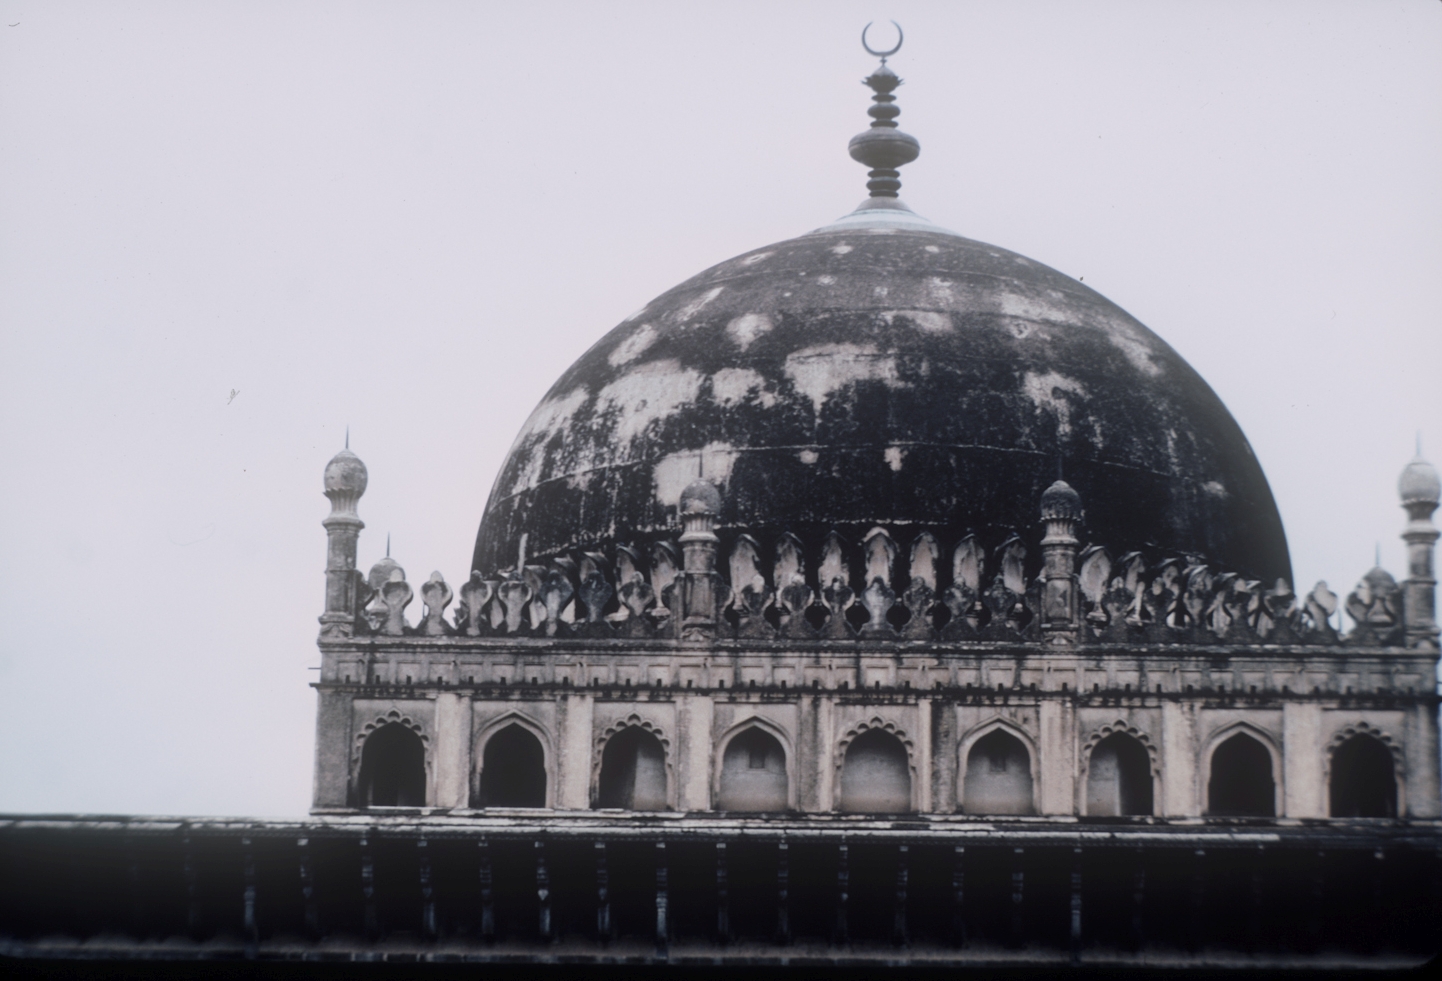 Dome with ornamental balustrade at the base